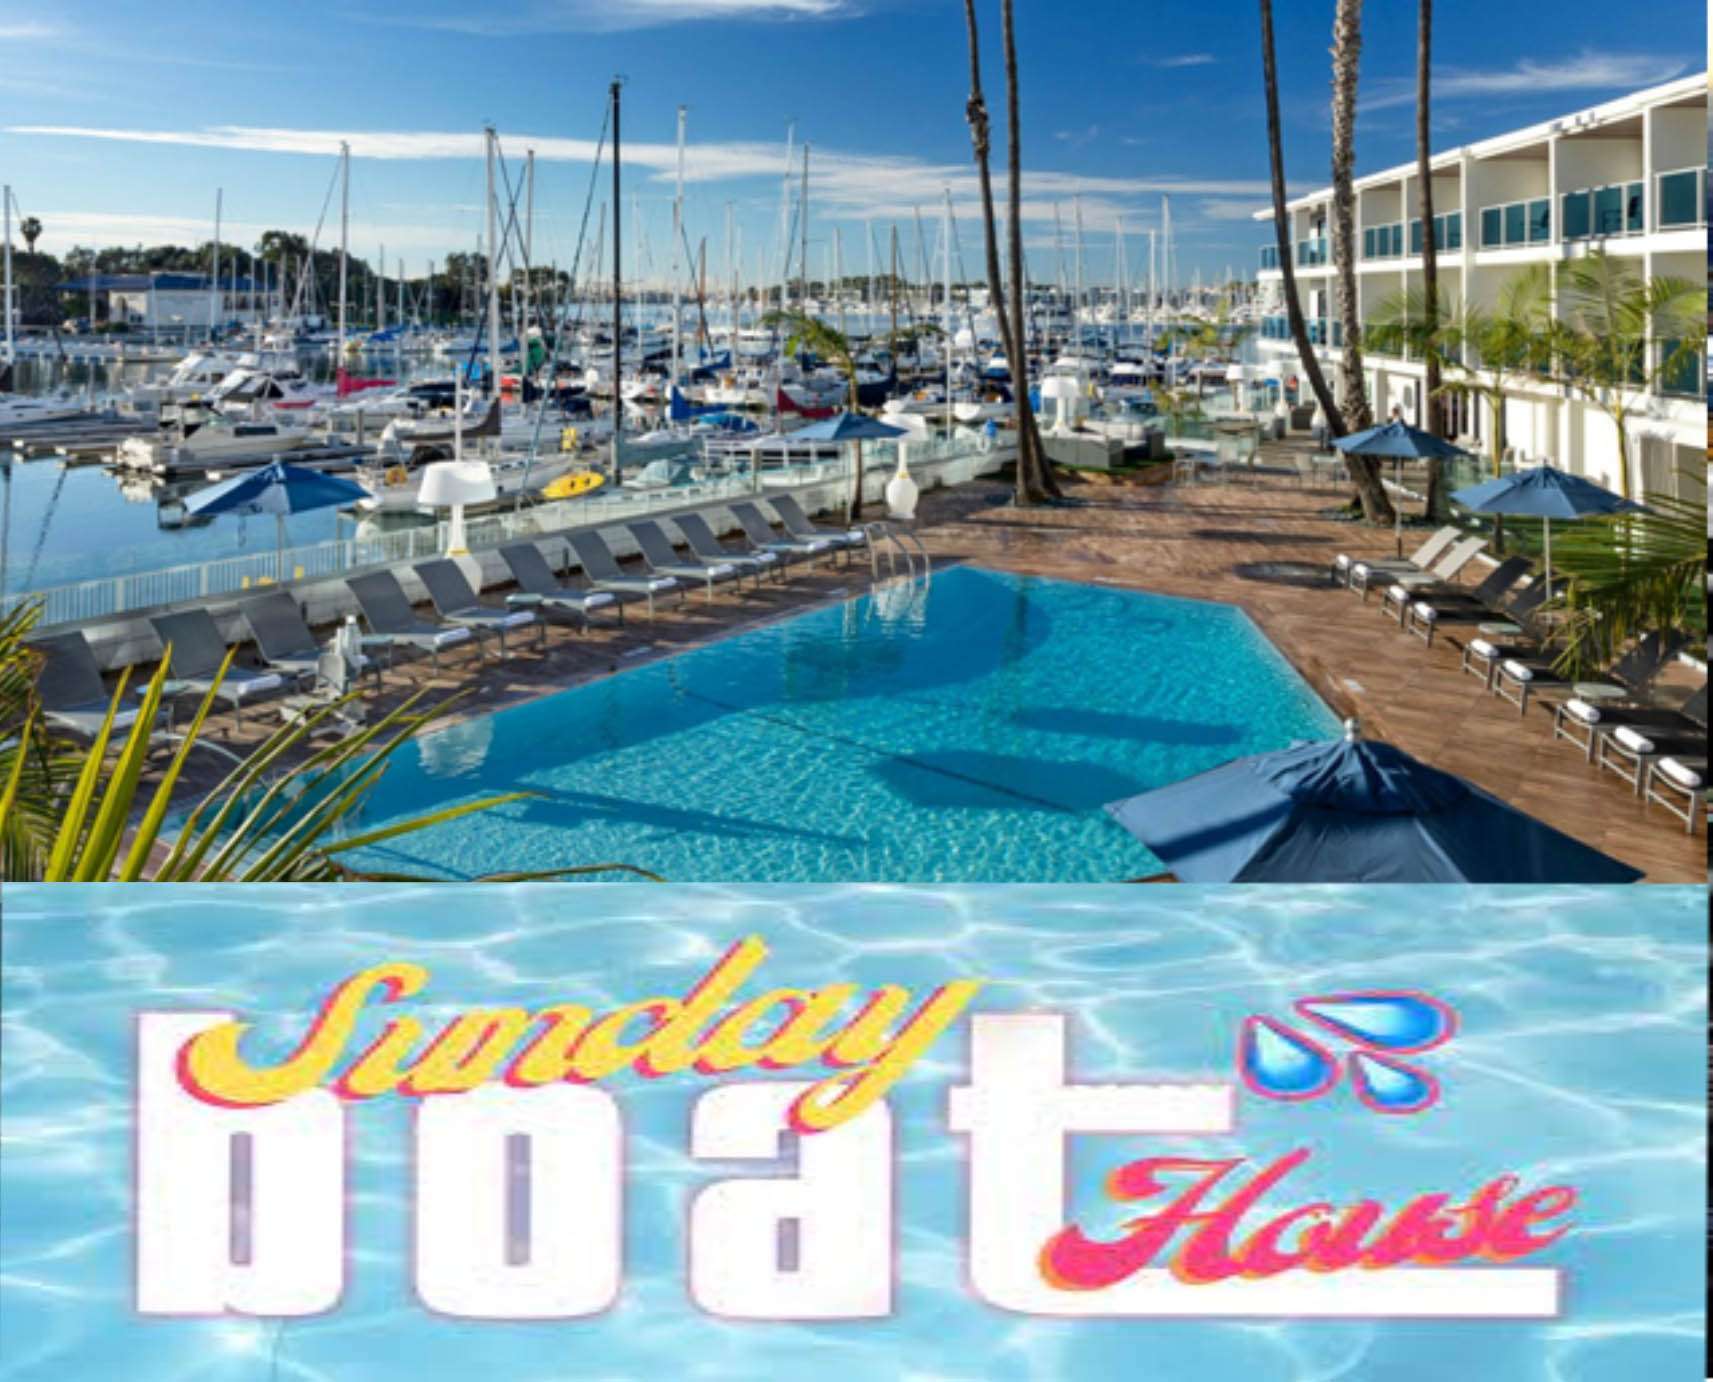 Sunday Boat House Pool Party 